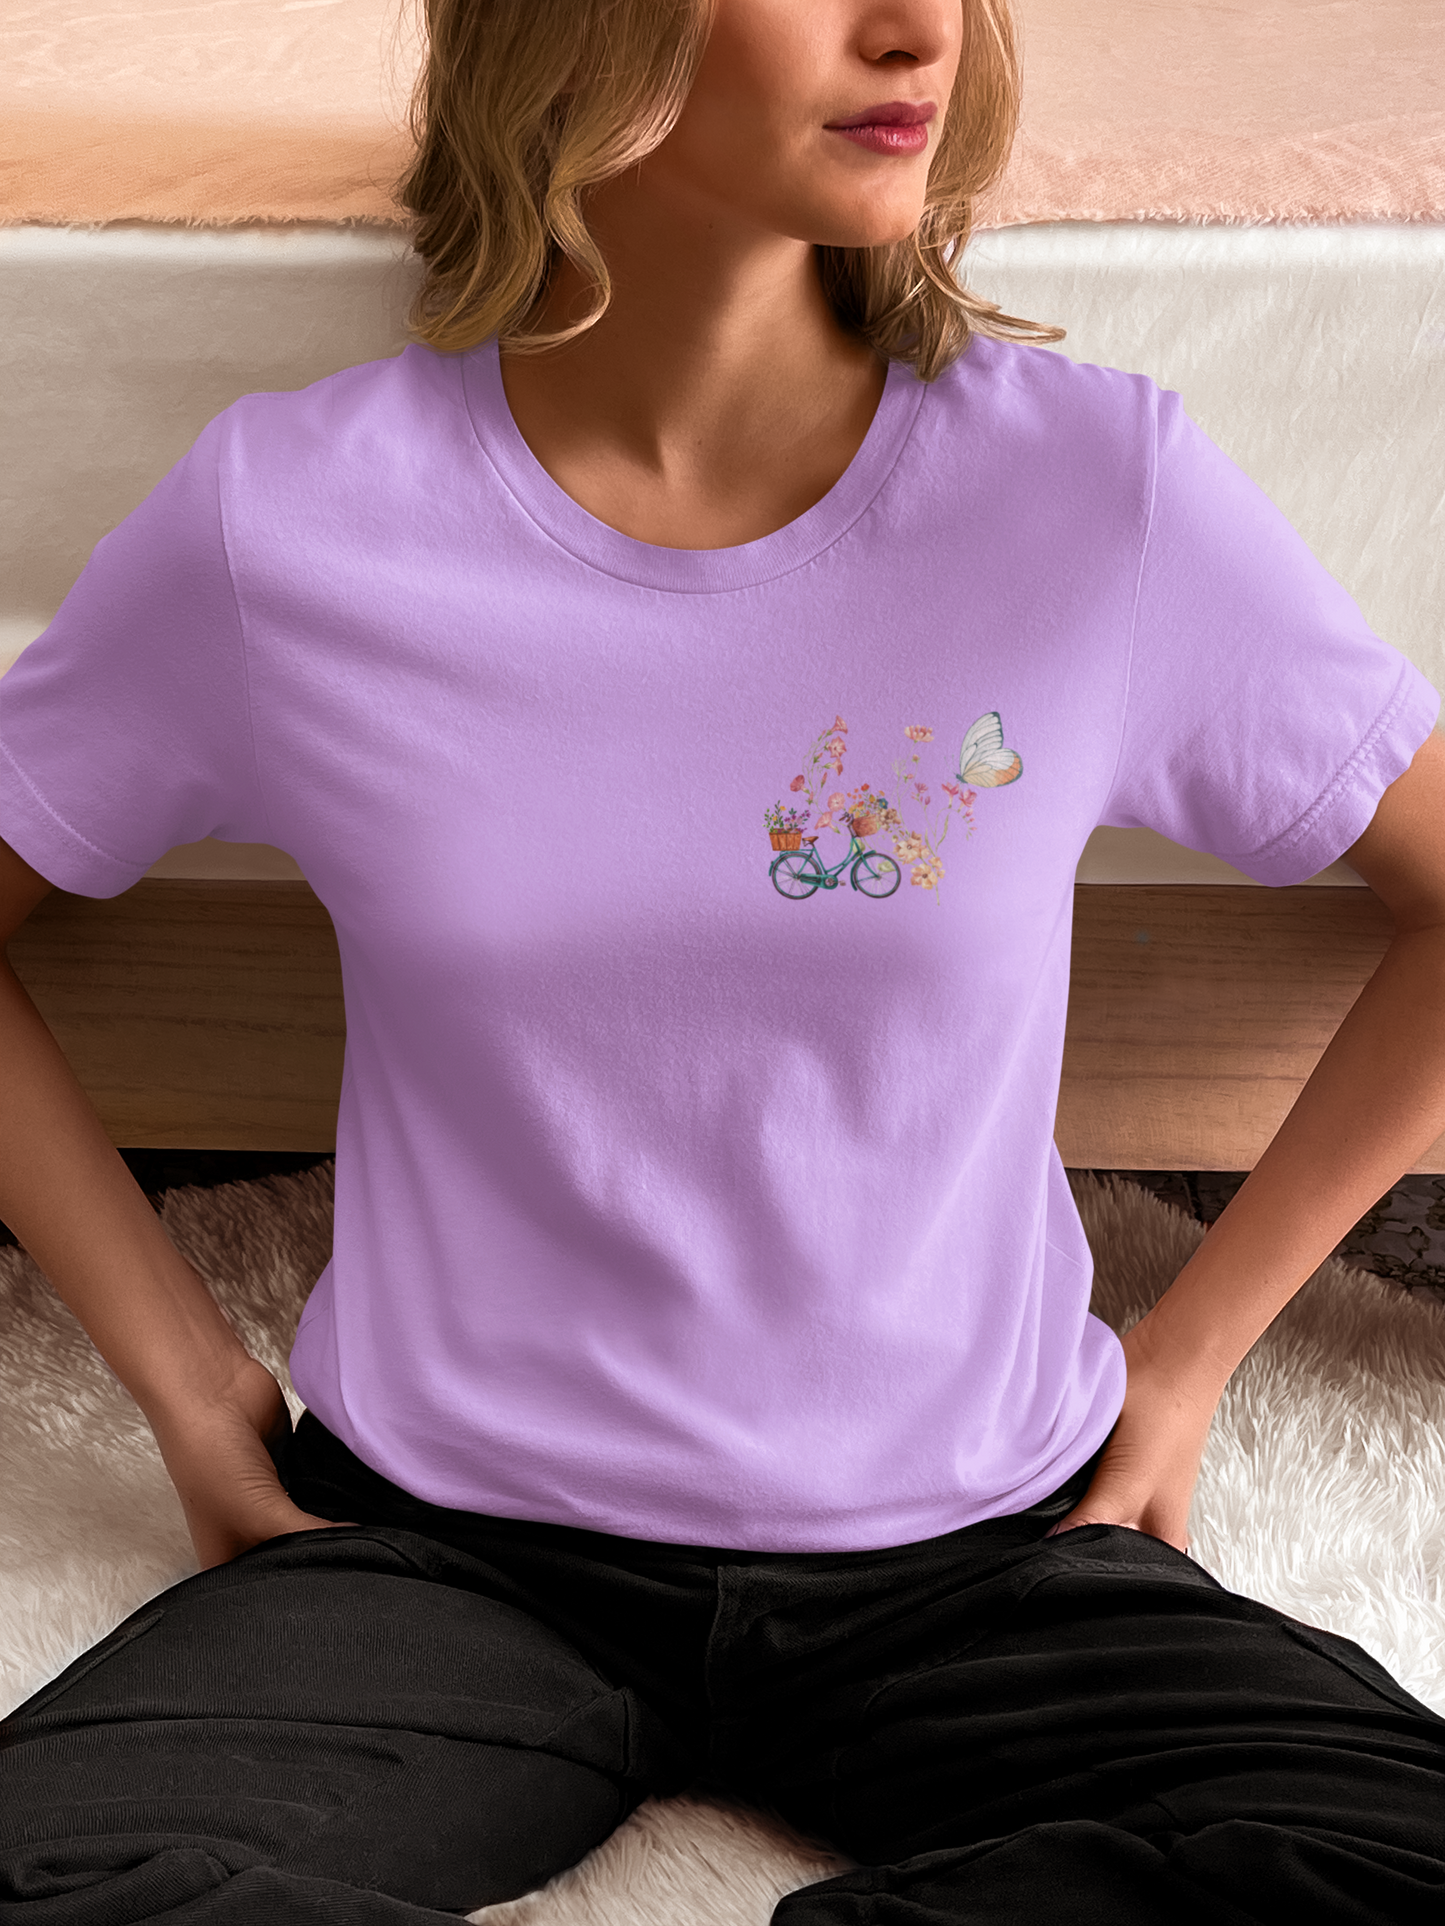 T-shirt with wild flower print on the back and small design on the front.